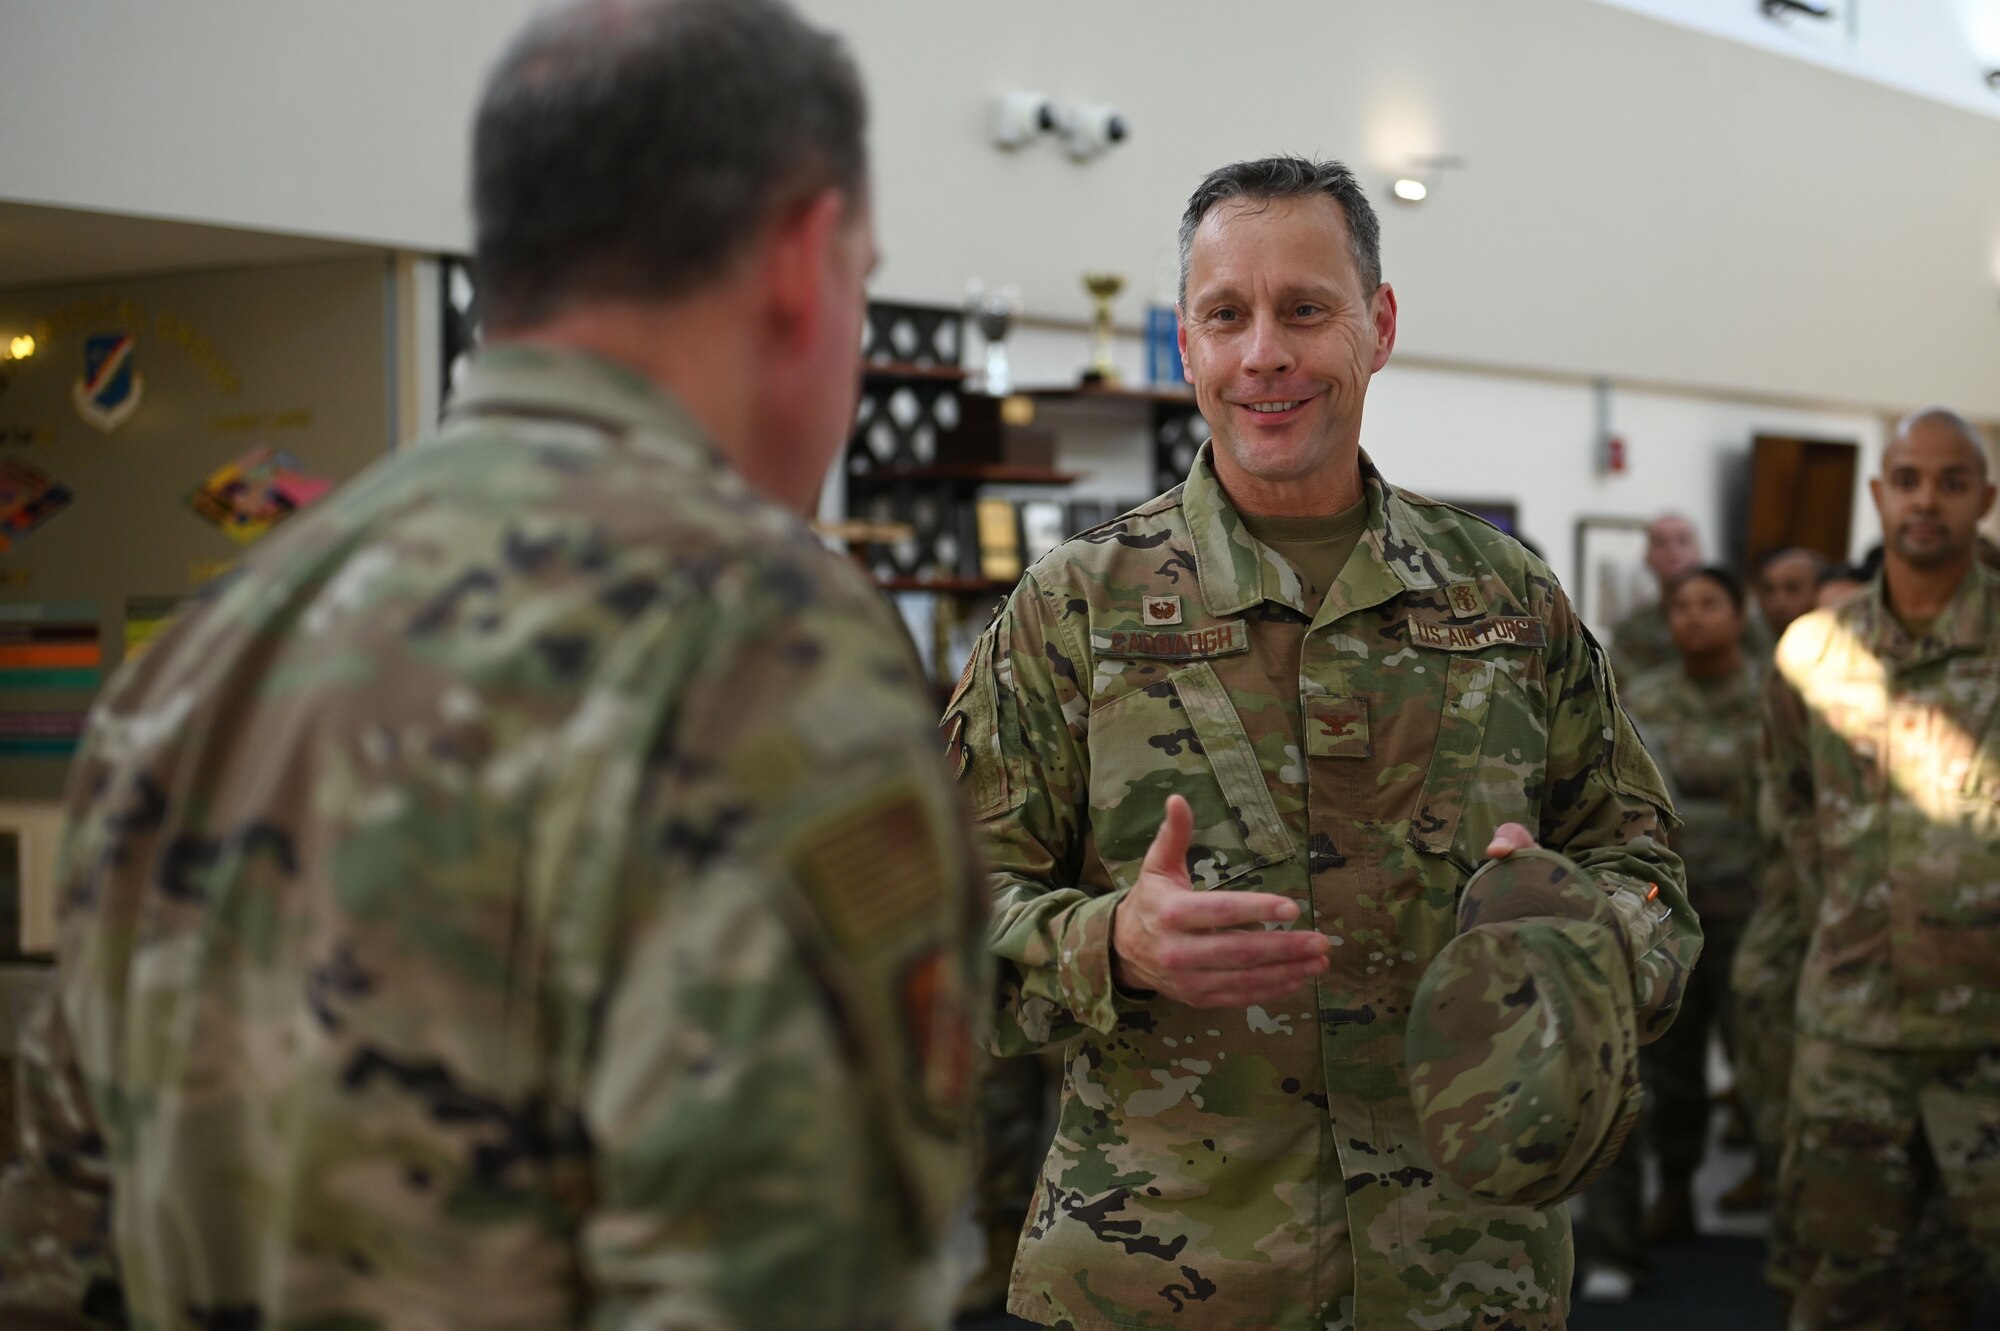 Col. Scott Carbaugh, right, 39th Medical Group commander, speaks with Gen. James B. Hecker, left, U.S. Air Forces in Europe and Air Forces Africa commander, during his visit to Incirlik Air Base, Turkey, Aug. 4, 2022. Hecker met with several Airmen and received briefings about the wing’s mission and capabilities while speaking with members about how their role supports the mission of USAFE-AFAFRICA. The wing takes deliberate actions to develop Airmen and their families; confronts global challenges in support of the National Defense Strategy to defend our country and our allies; and utilizes dedicated efforts to deliver peace to our nation and its allies by fostering stability and deterring aggression throughout Europe and Africa. (U.S. Air Force photo by Staff Sgt. Matthew Angulo)